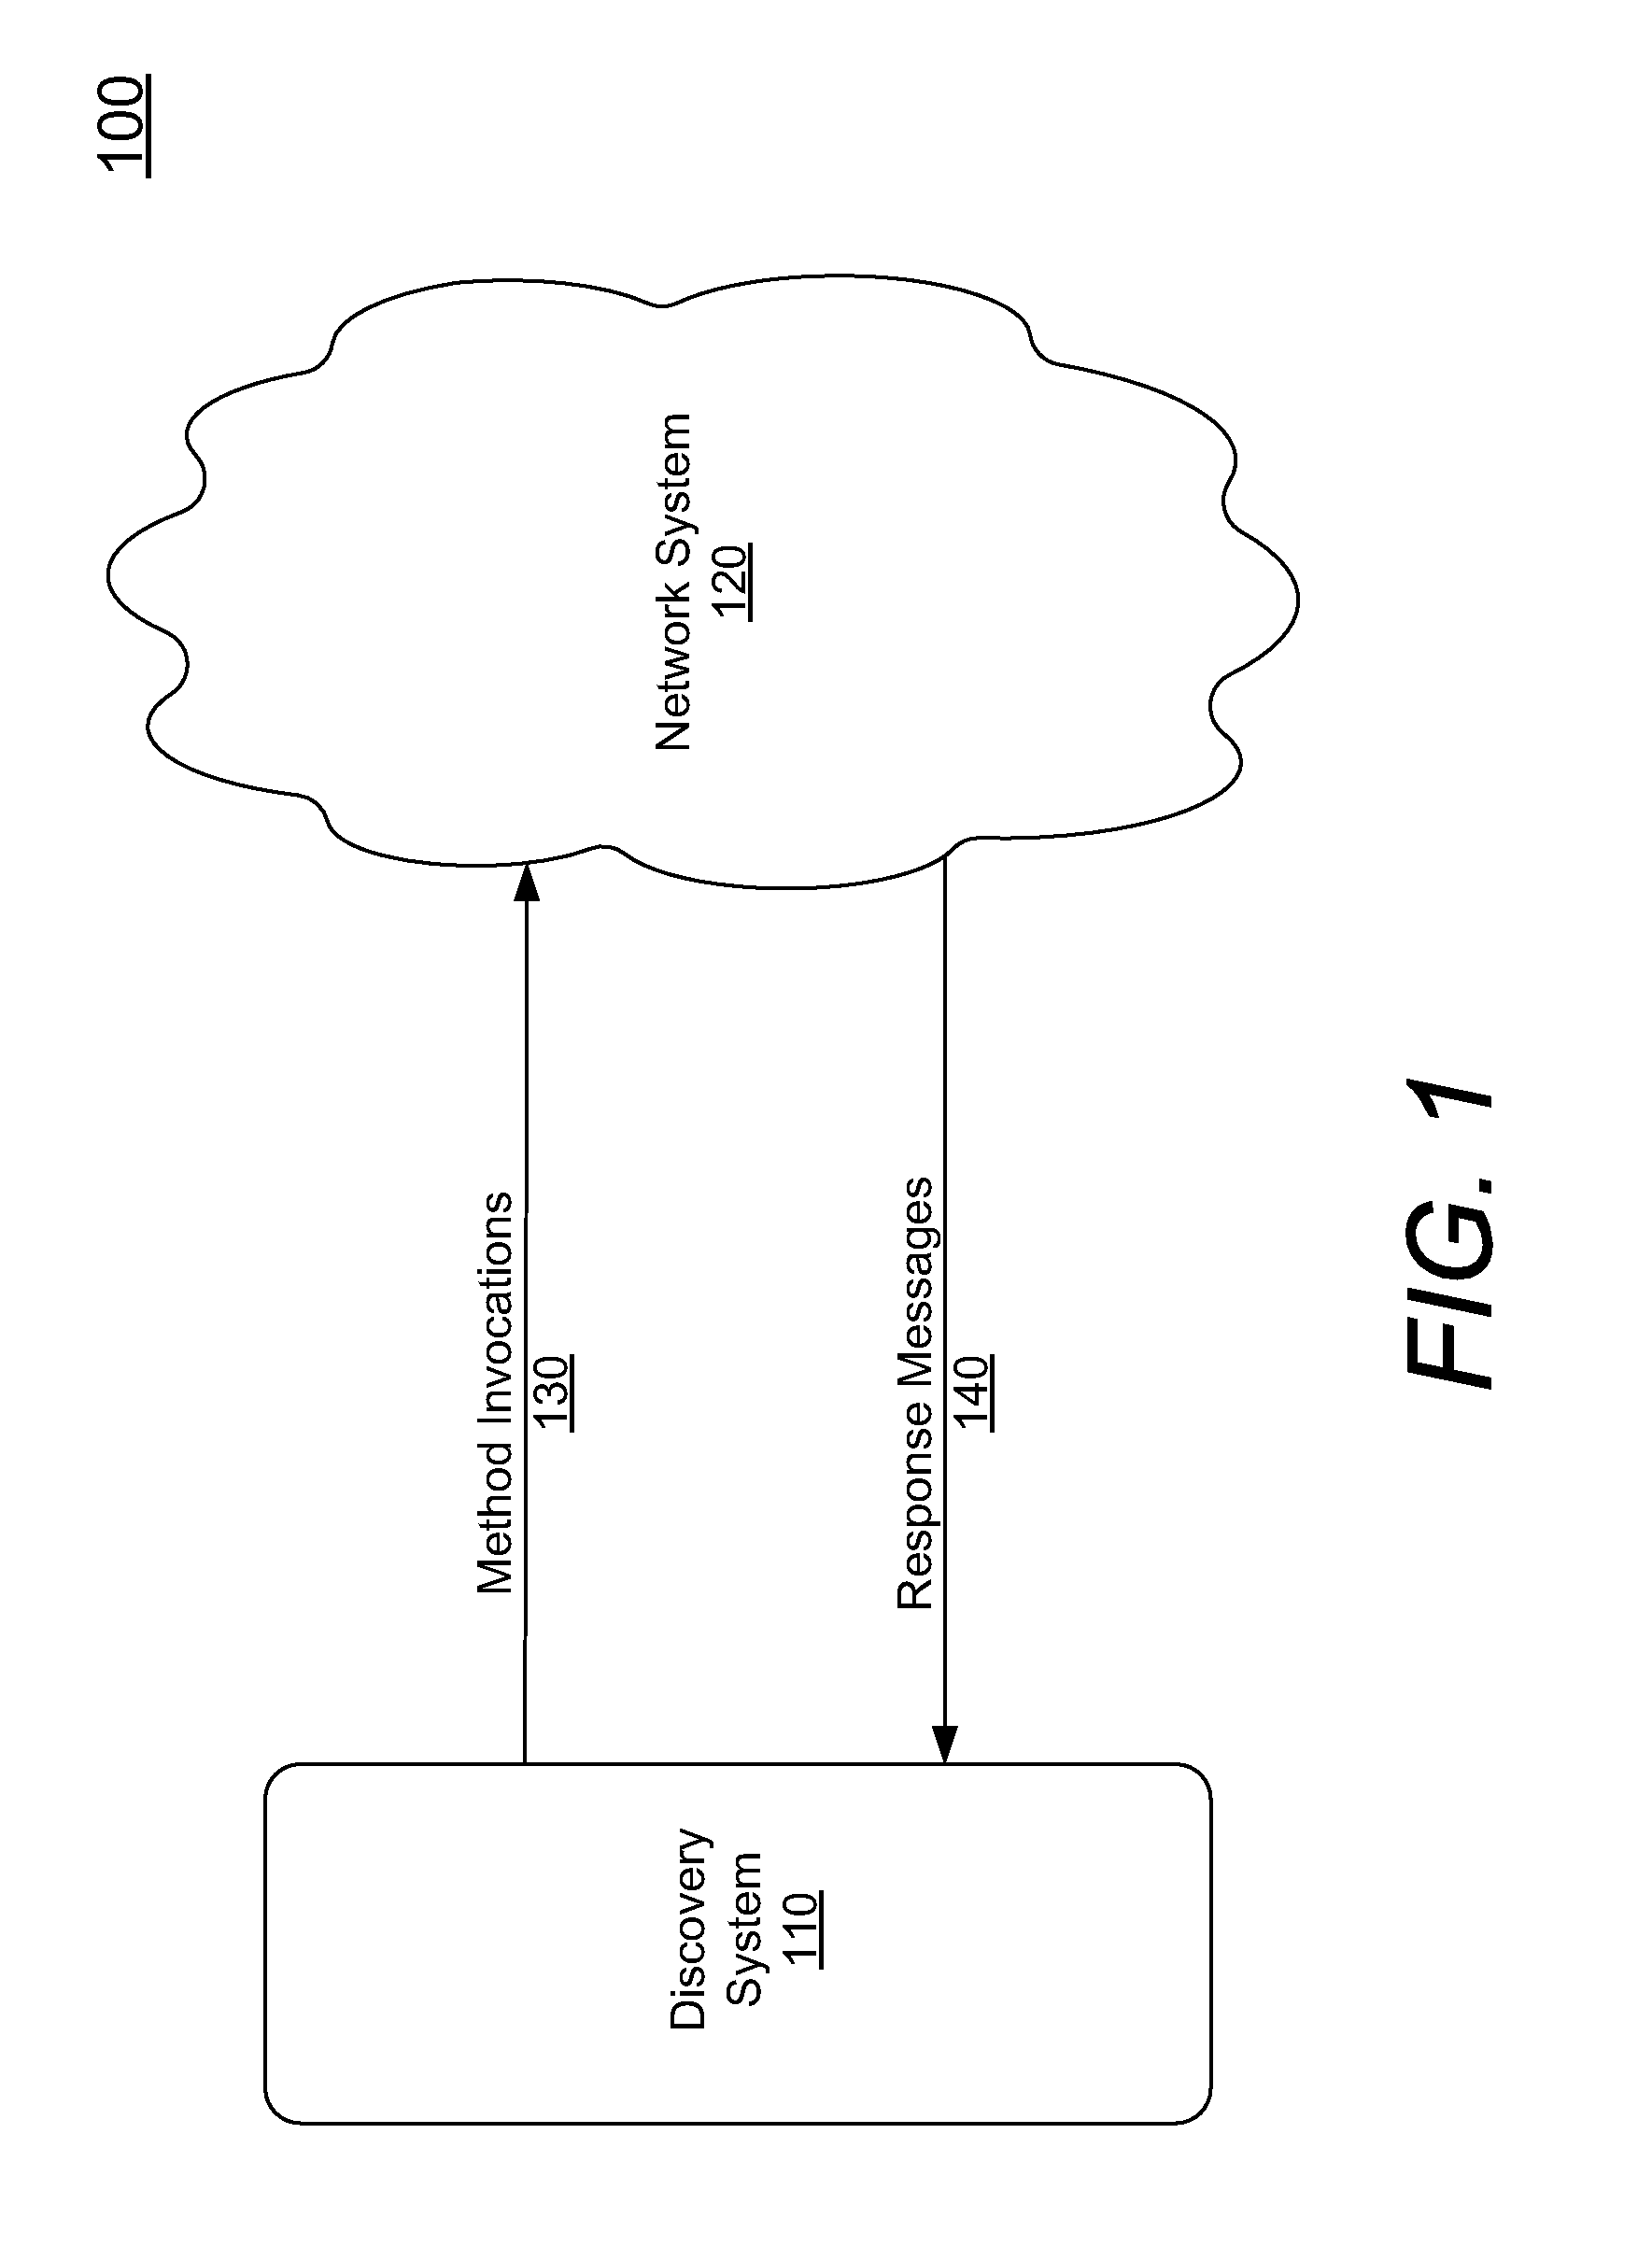 System and Method for Discovering Assets and Functional Relationships in a Network